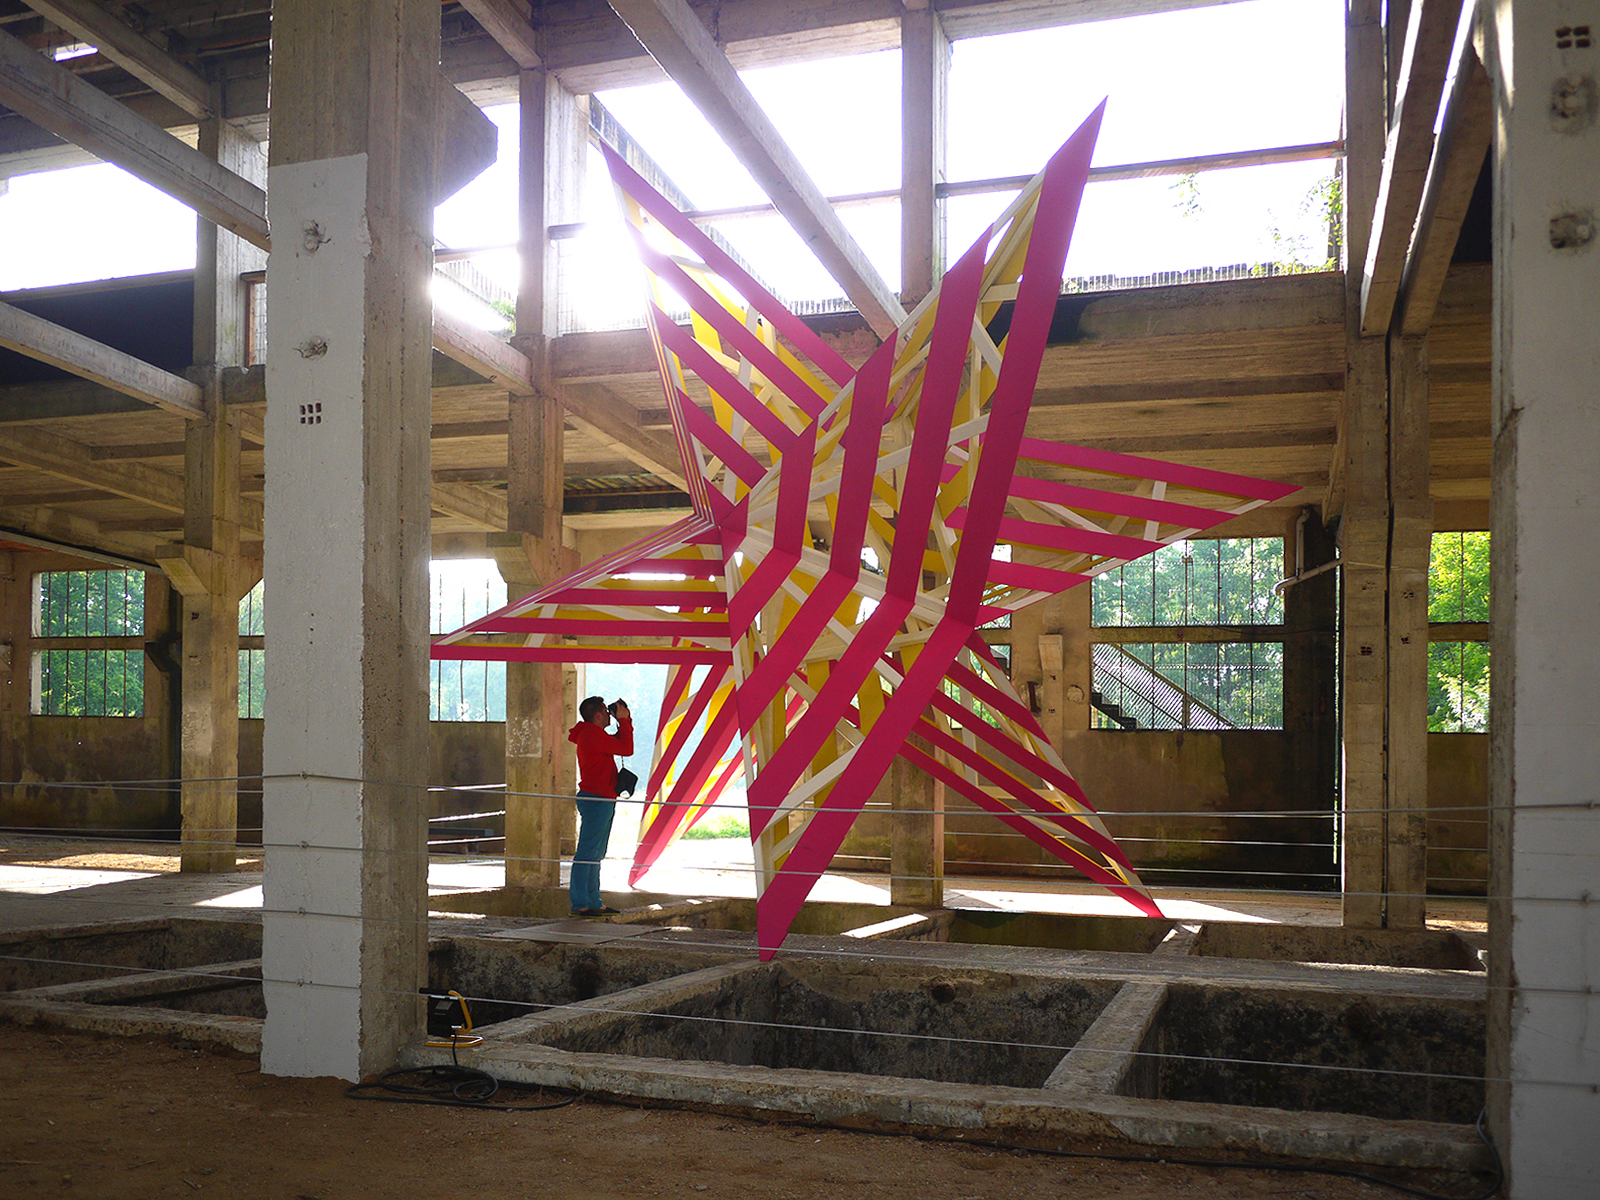 Akoaki installed two stars, each spanning over 30 feet, in a defunct tannery with all elements produced and assembled on-site. Pop It Up, Amilly, France, 2013. Credit: Akoaki